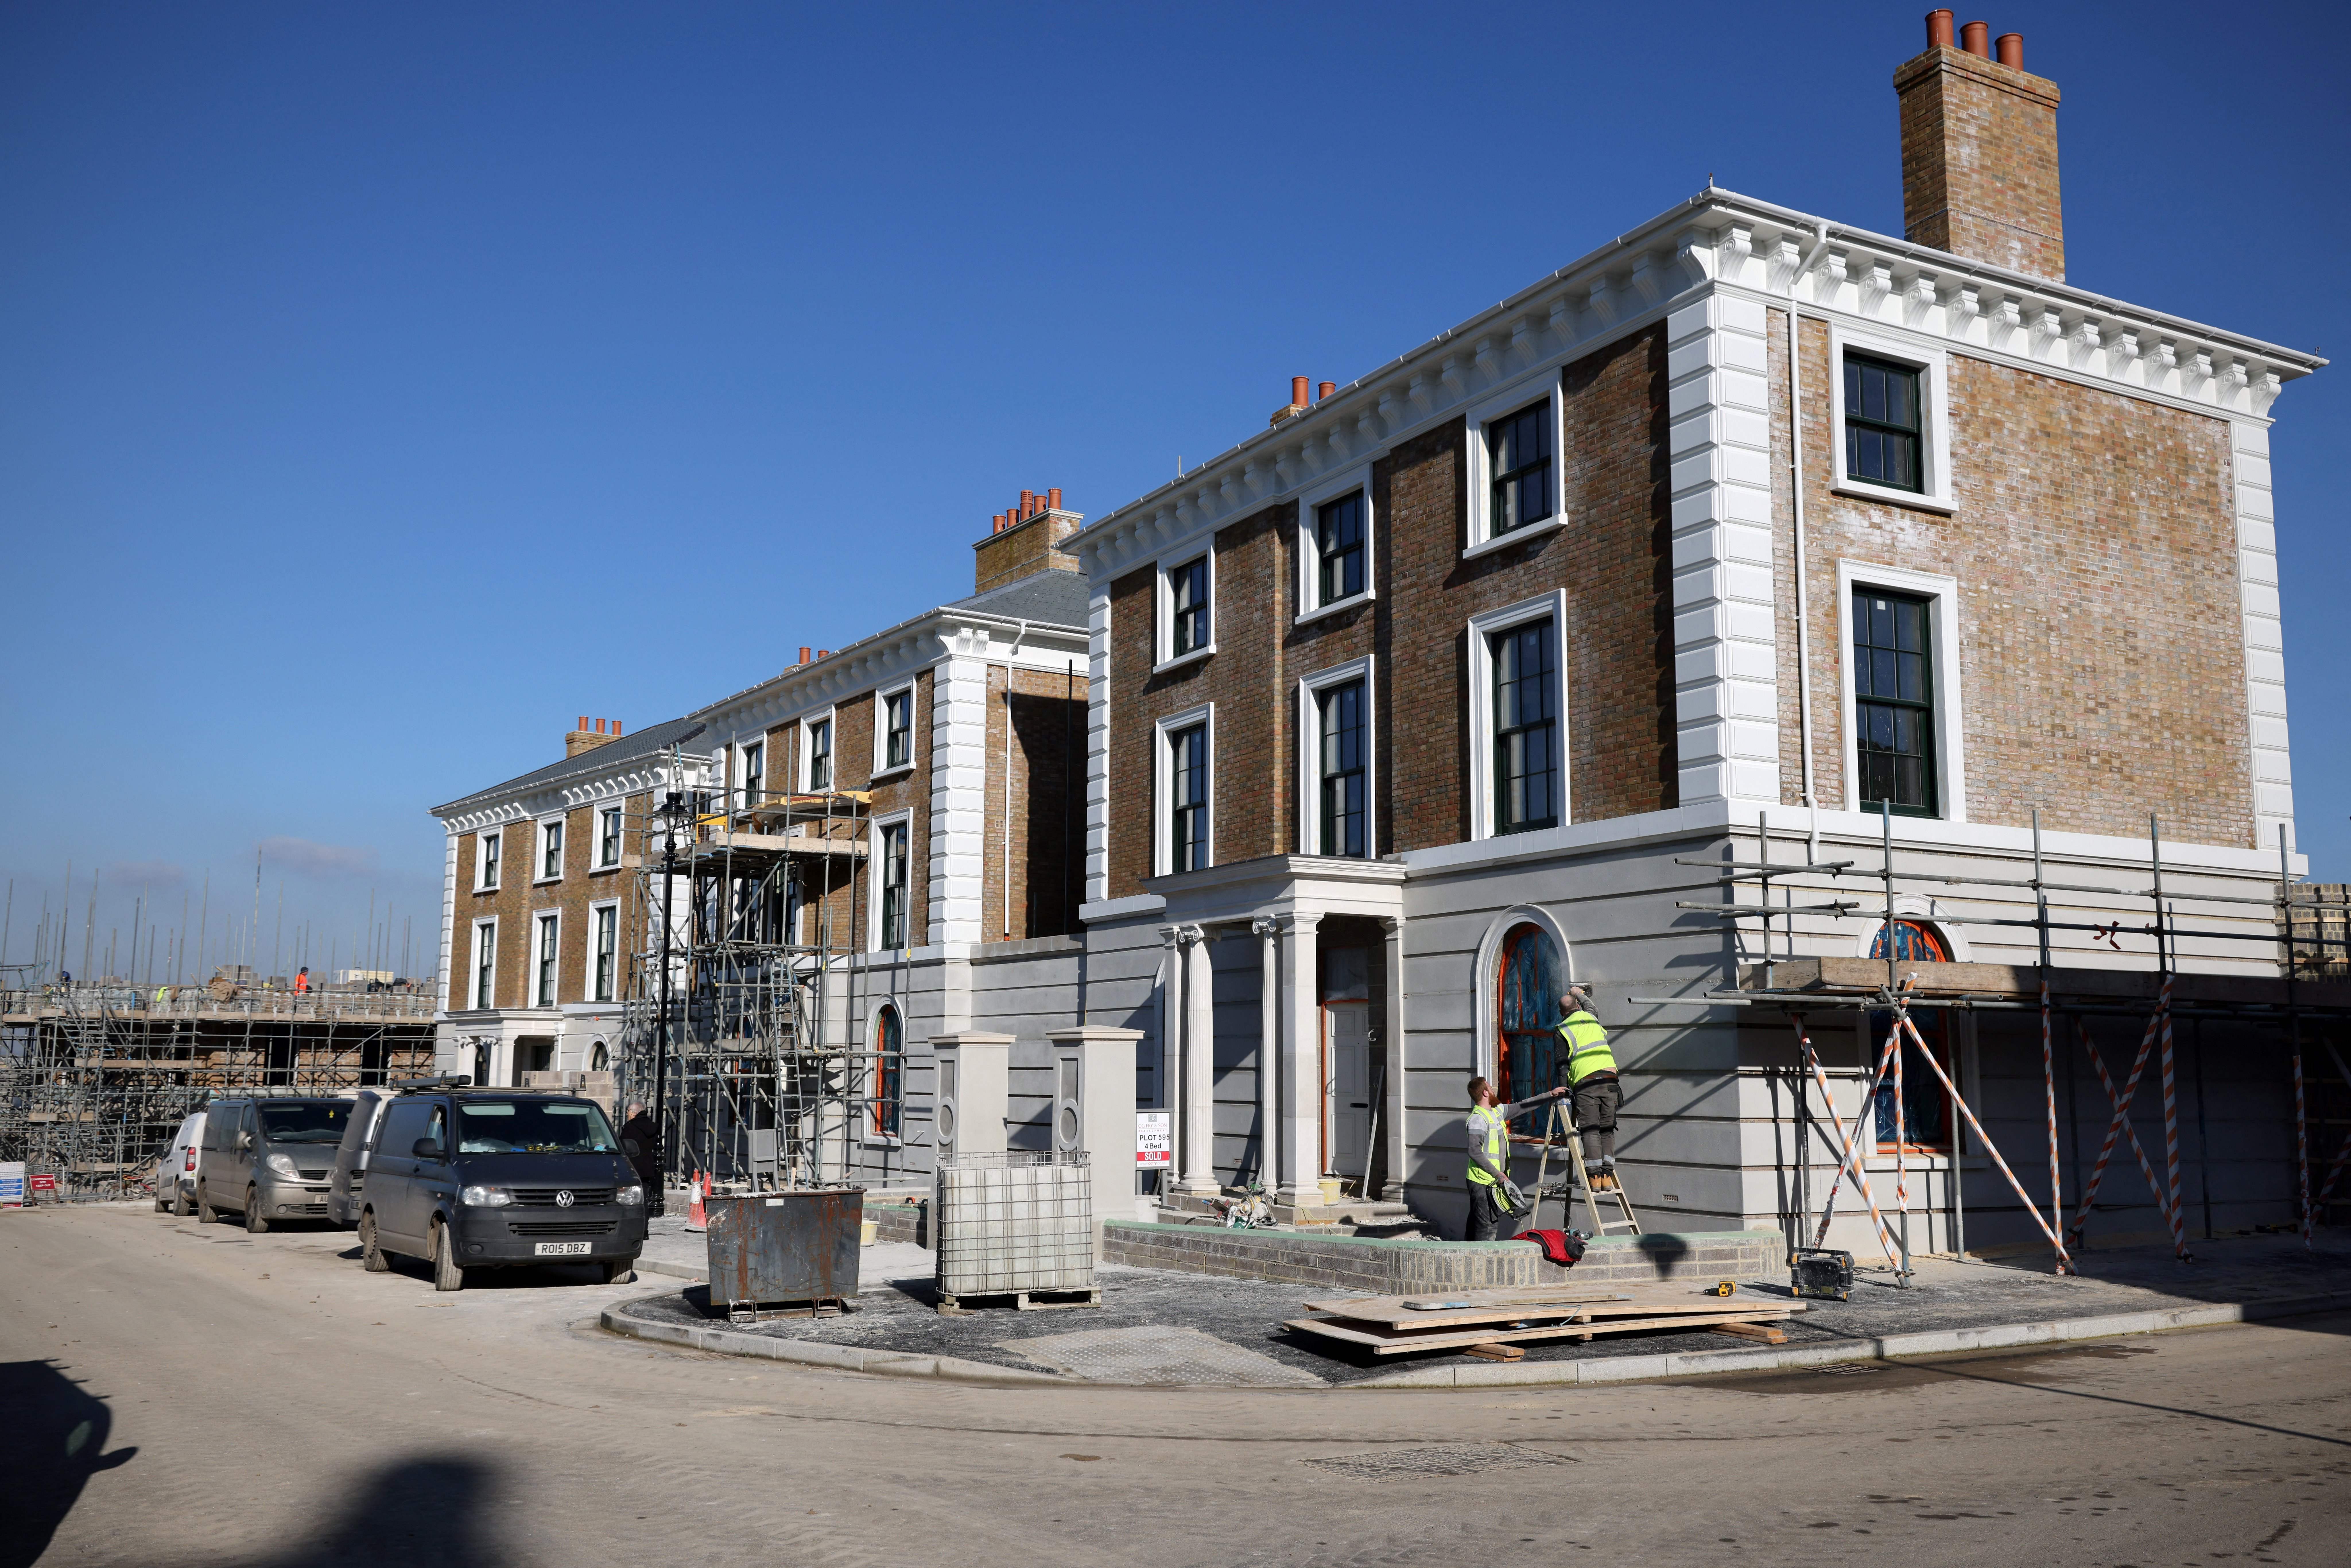 Construction builders work on the facade of a newly built house in the latest phase of development in Poundbury